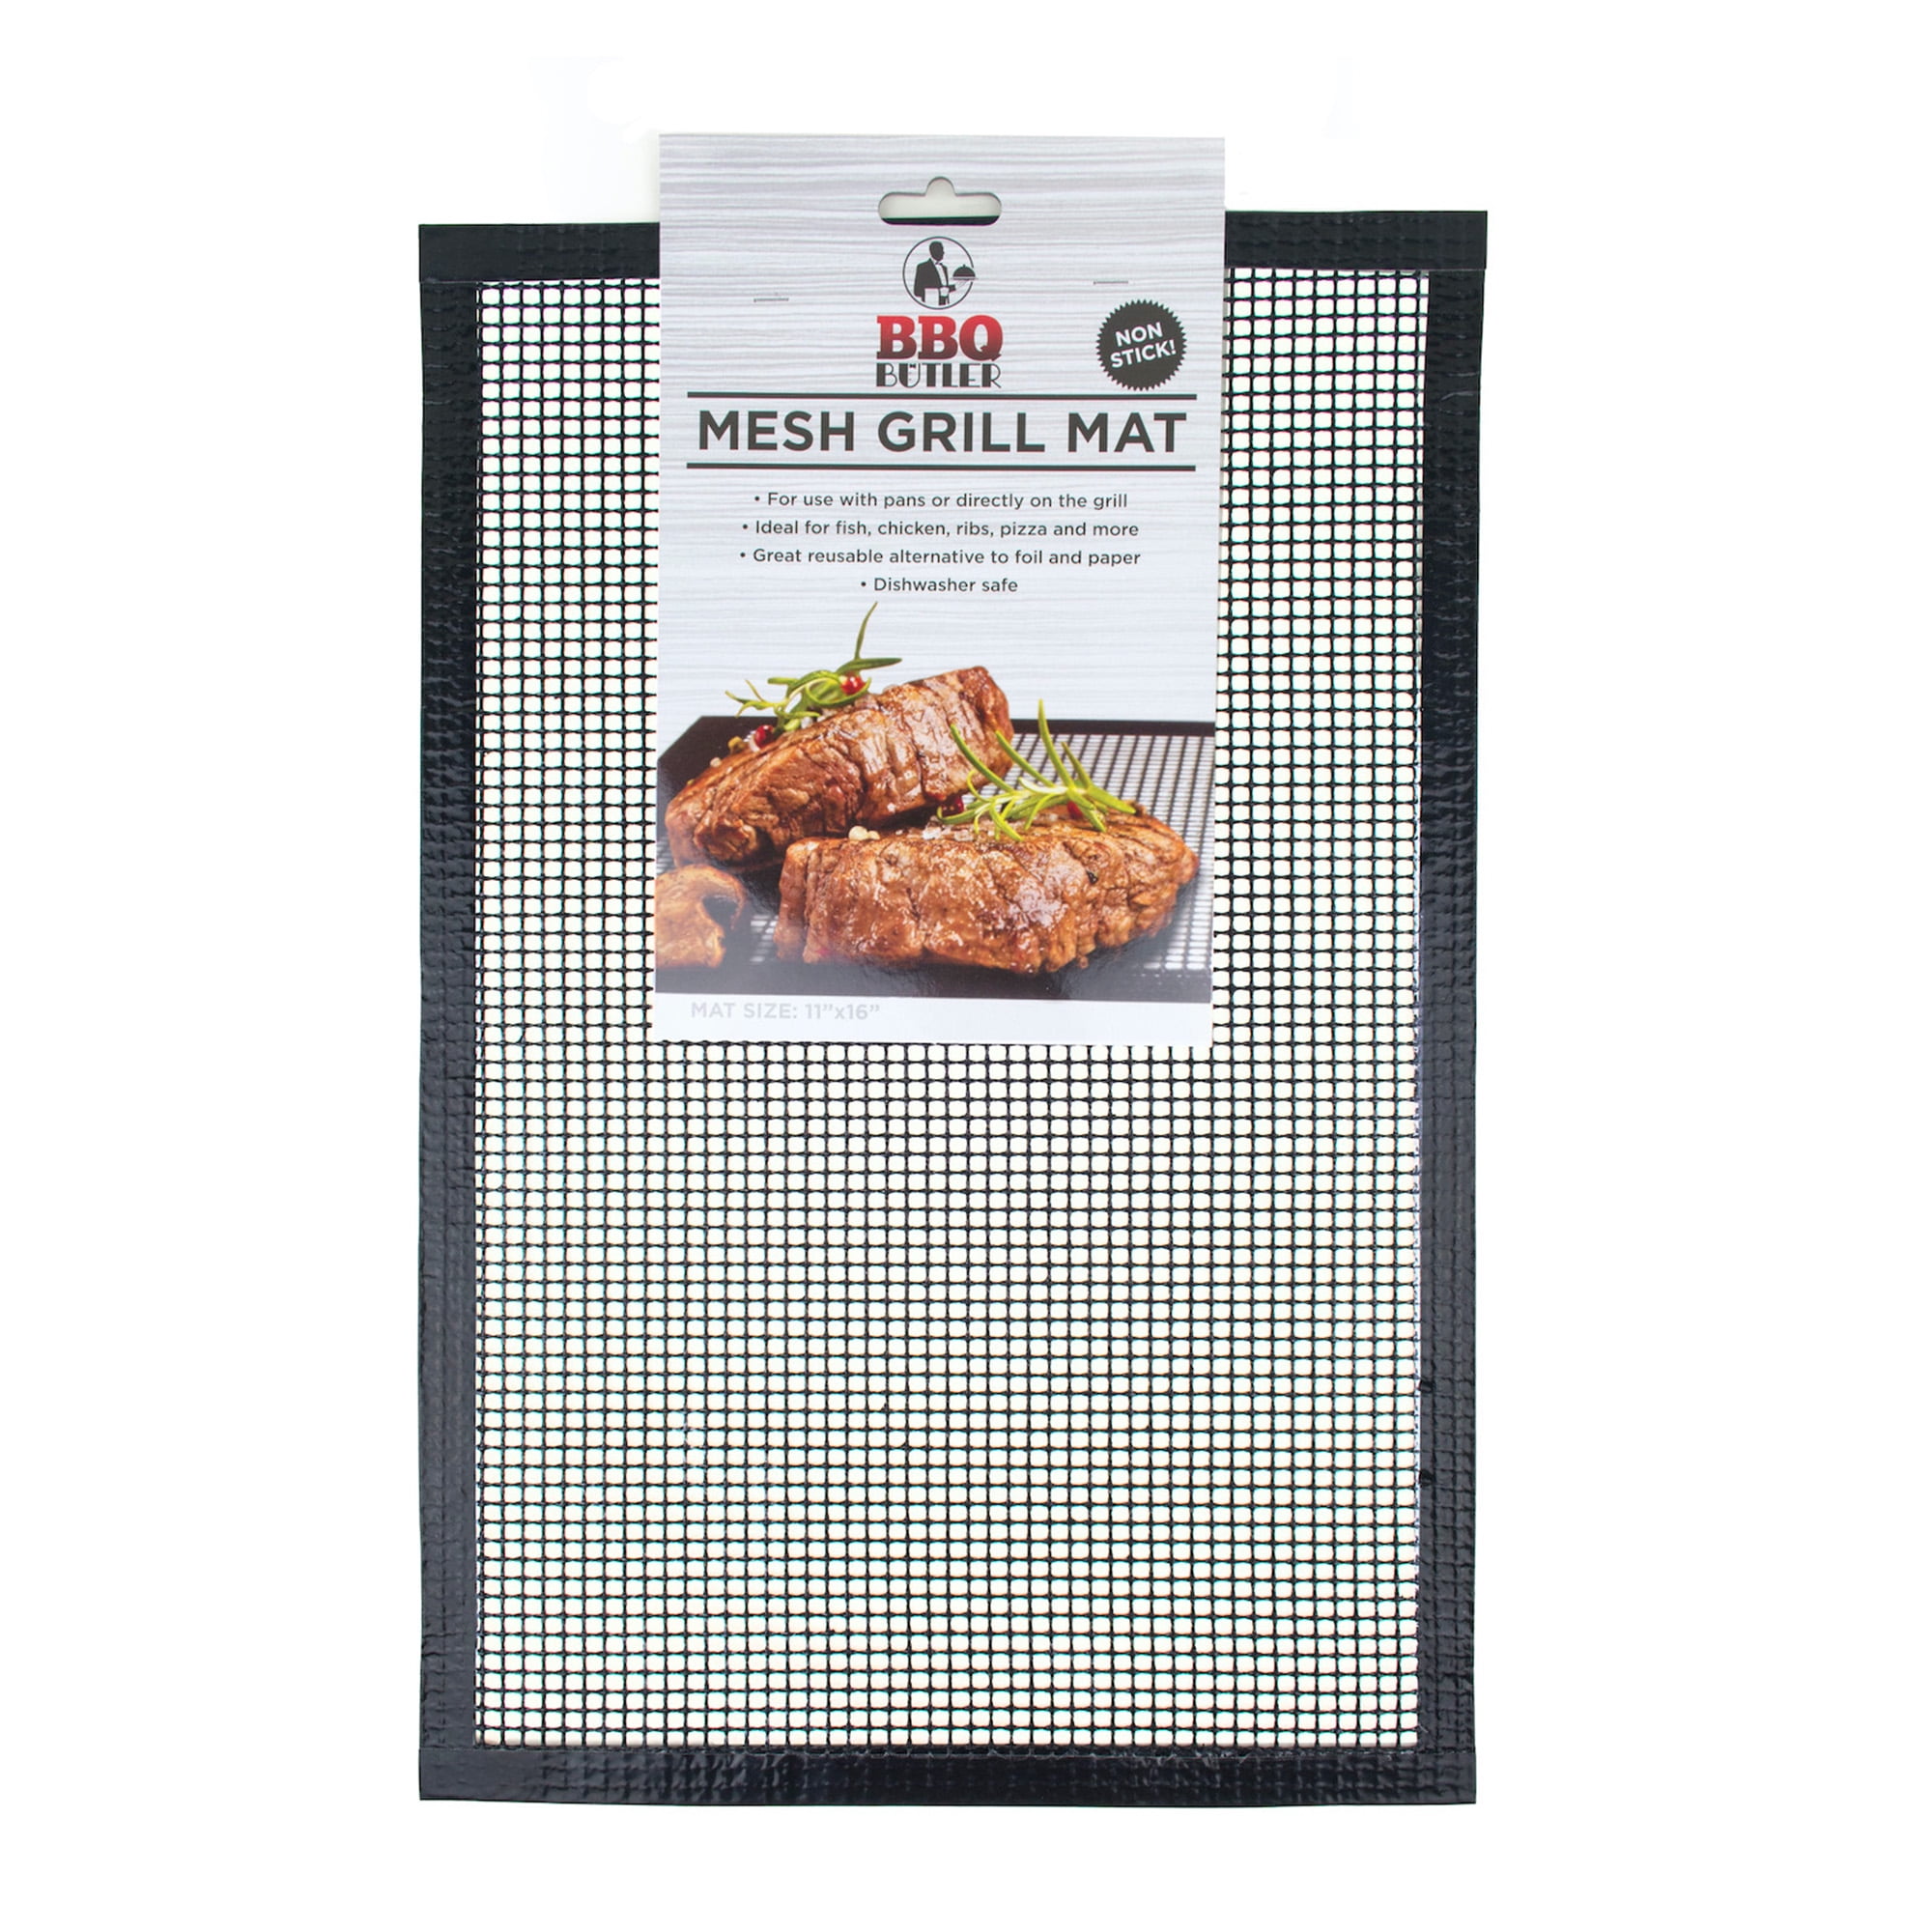 Details about   5Pcs Grill Mat BBQ Mesh Non-Stick Cooking Sheet Liner Pad /Thermometer /2xBrush 